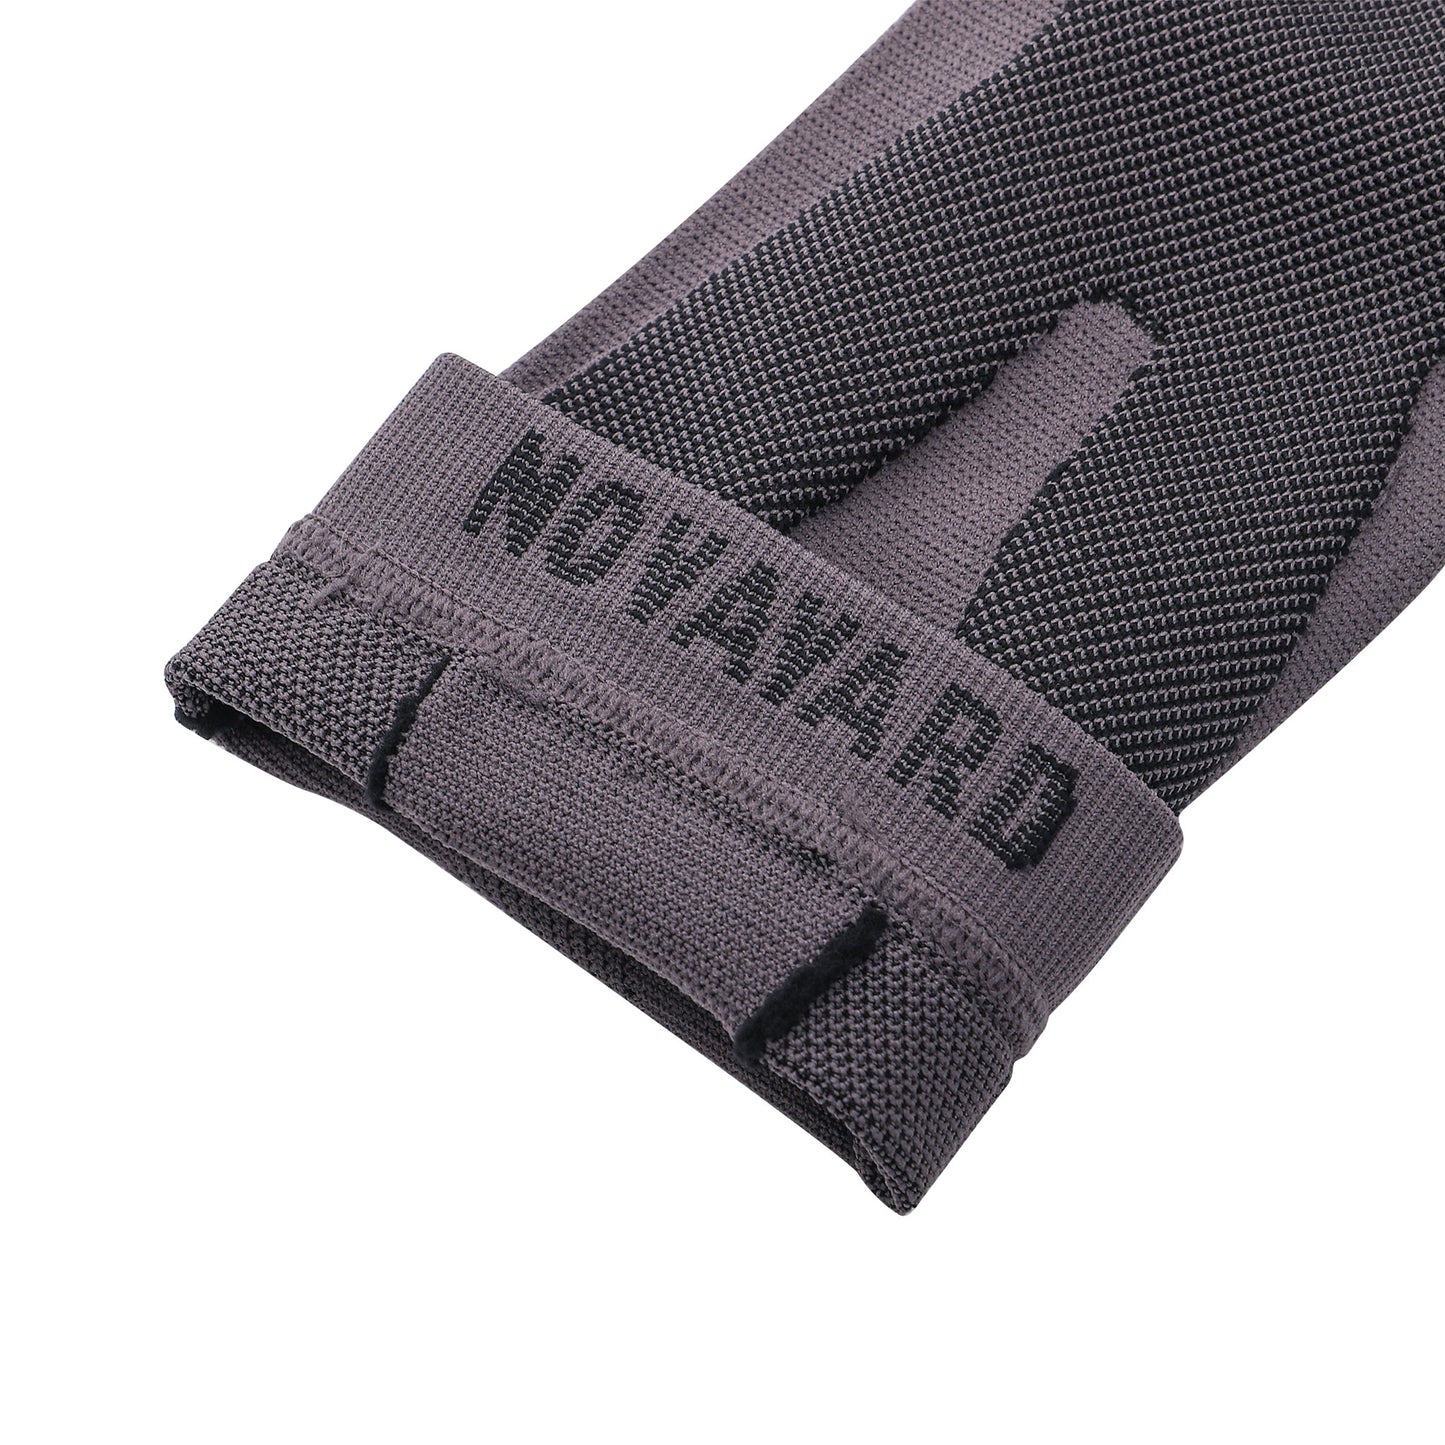 NOVAYAD Elbow Guards For Athletic Use Compression Elbow Pads Arm Brace Support Breathable Elbow Wraps